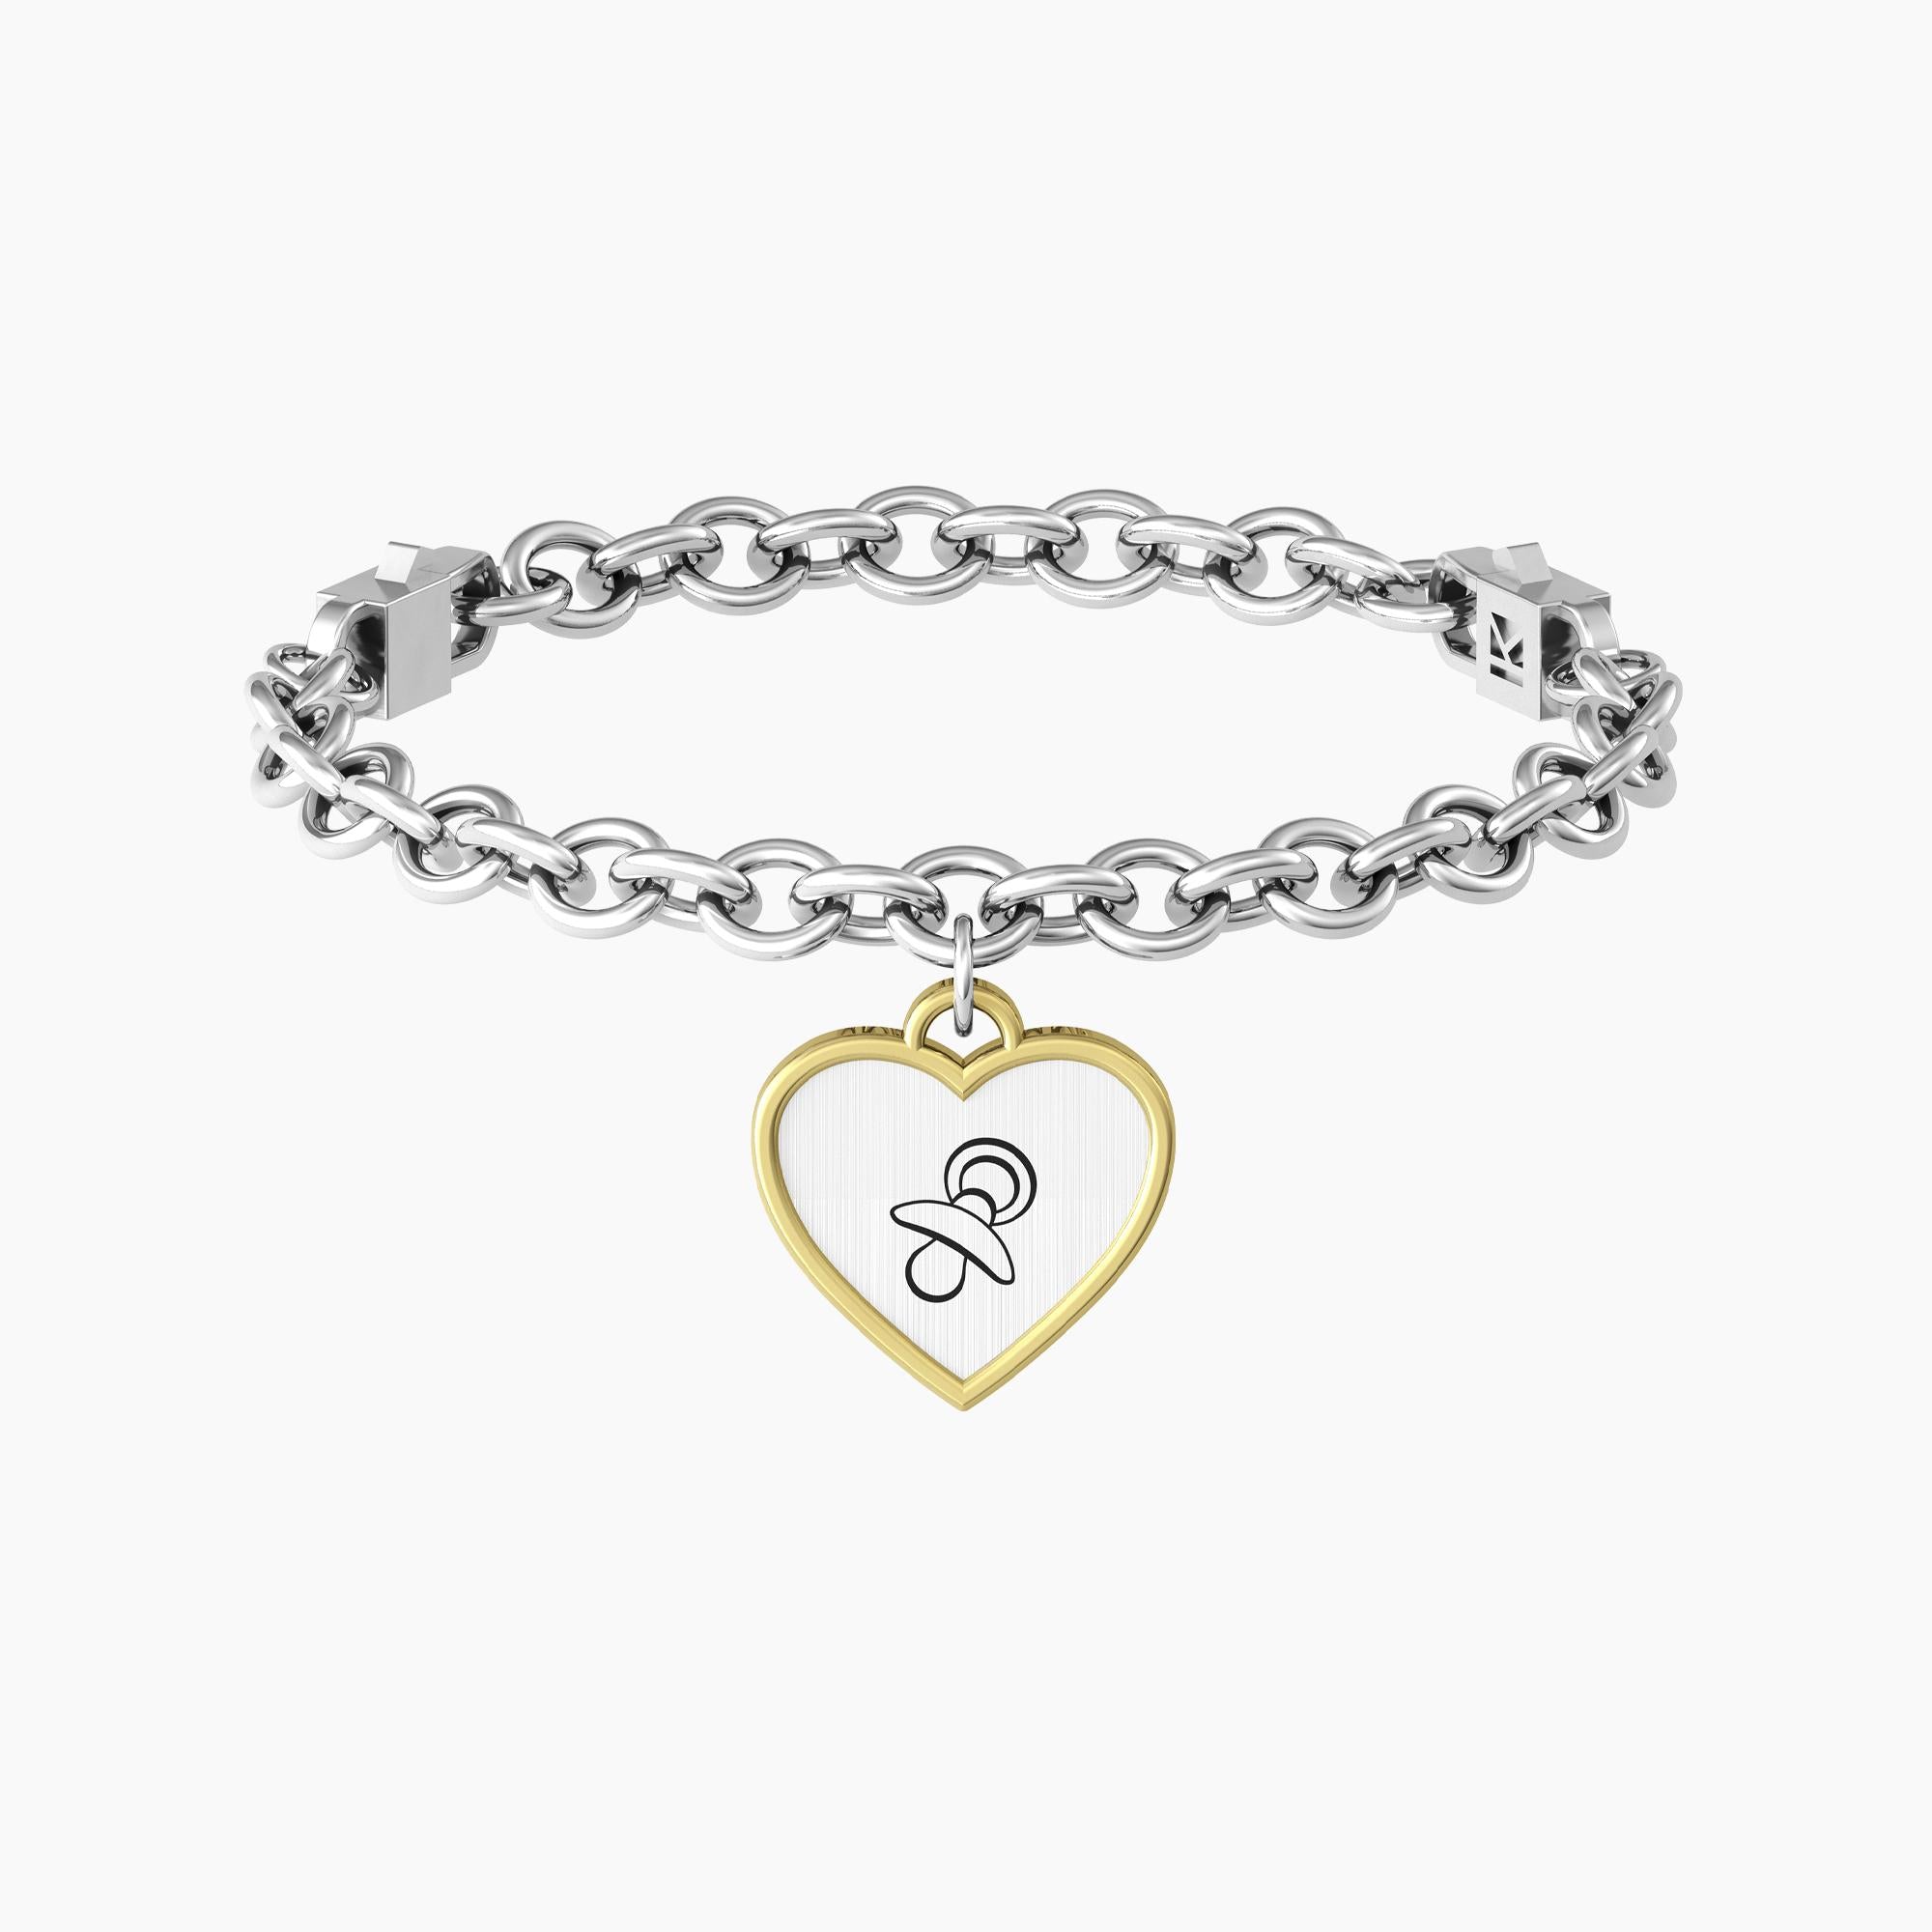 Kidult Bracciale Donna collezione Special Moments - Cuore / Welcome baby - 732009